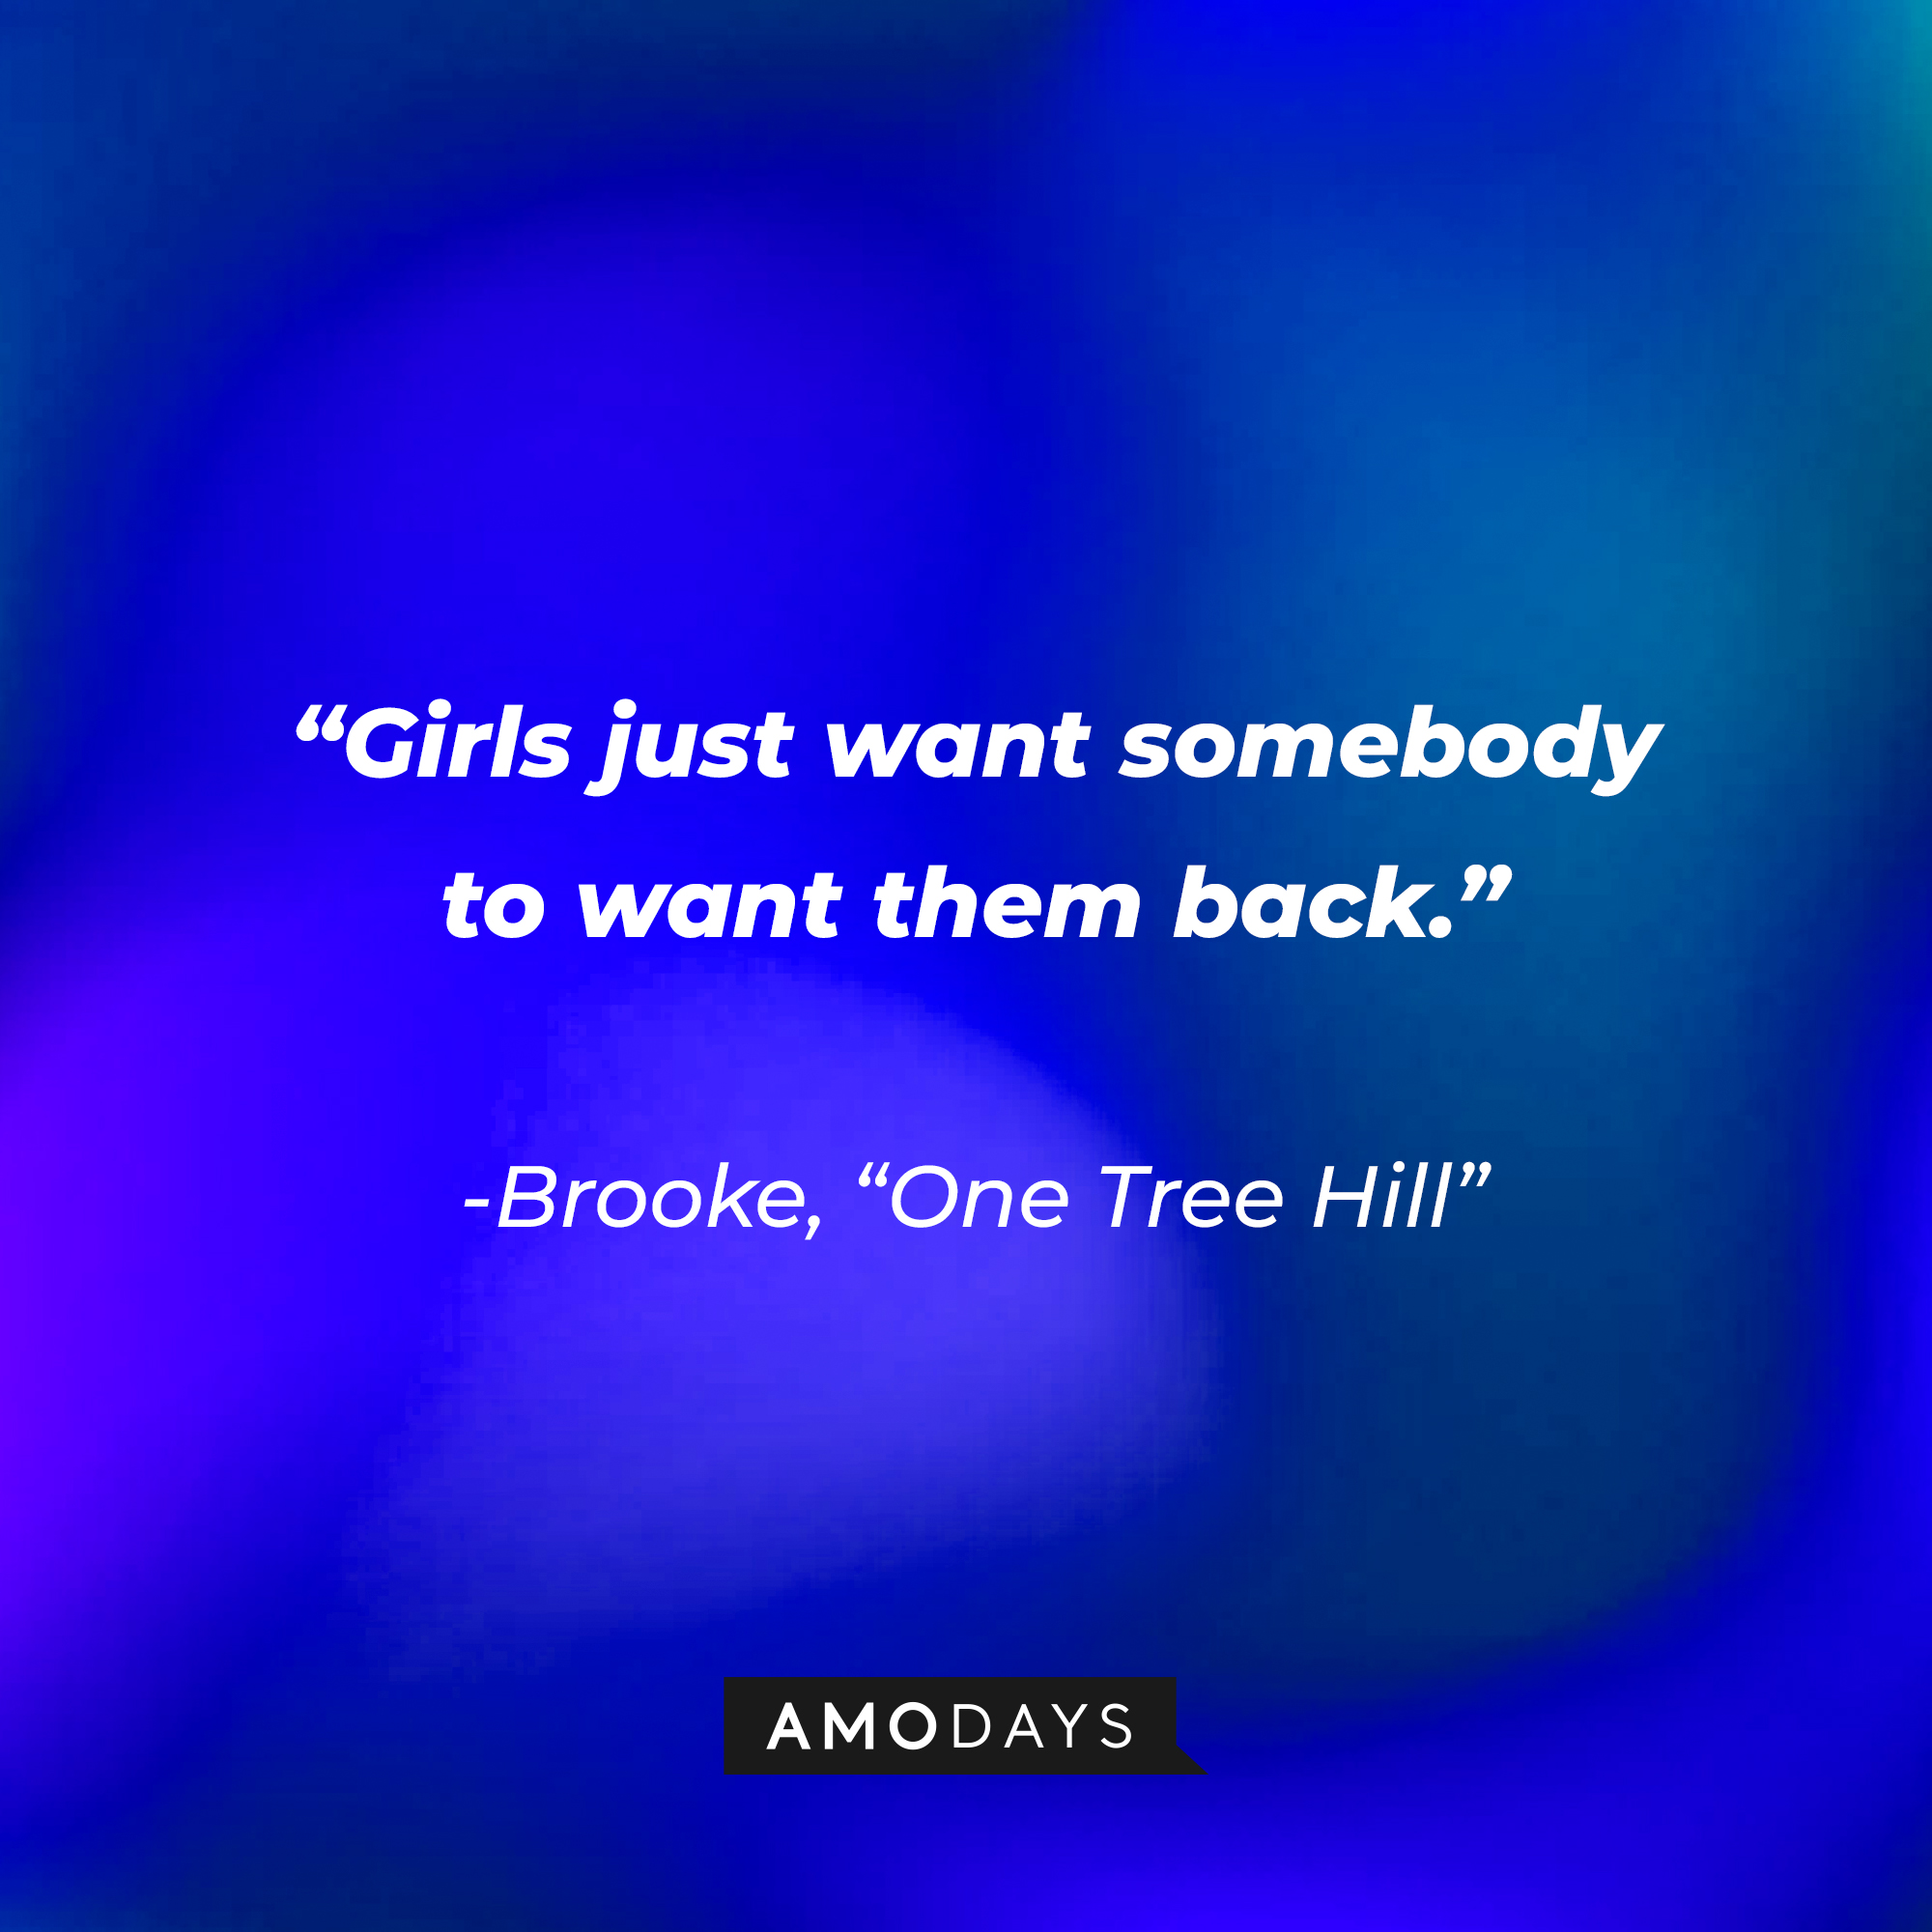 Brooke’s quote from “One Tree Hill”: “Girls just want somebody to want them back.” | Source: AmoDays